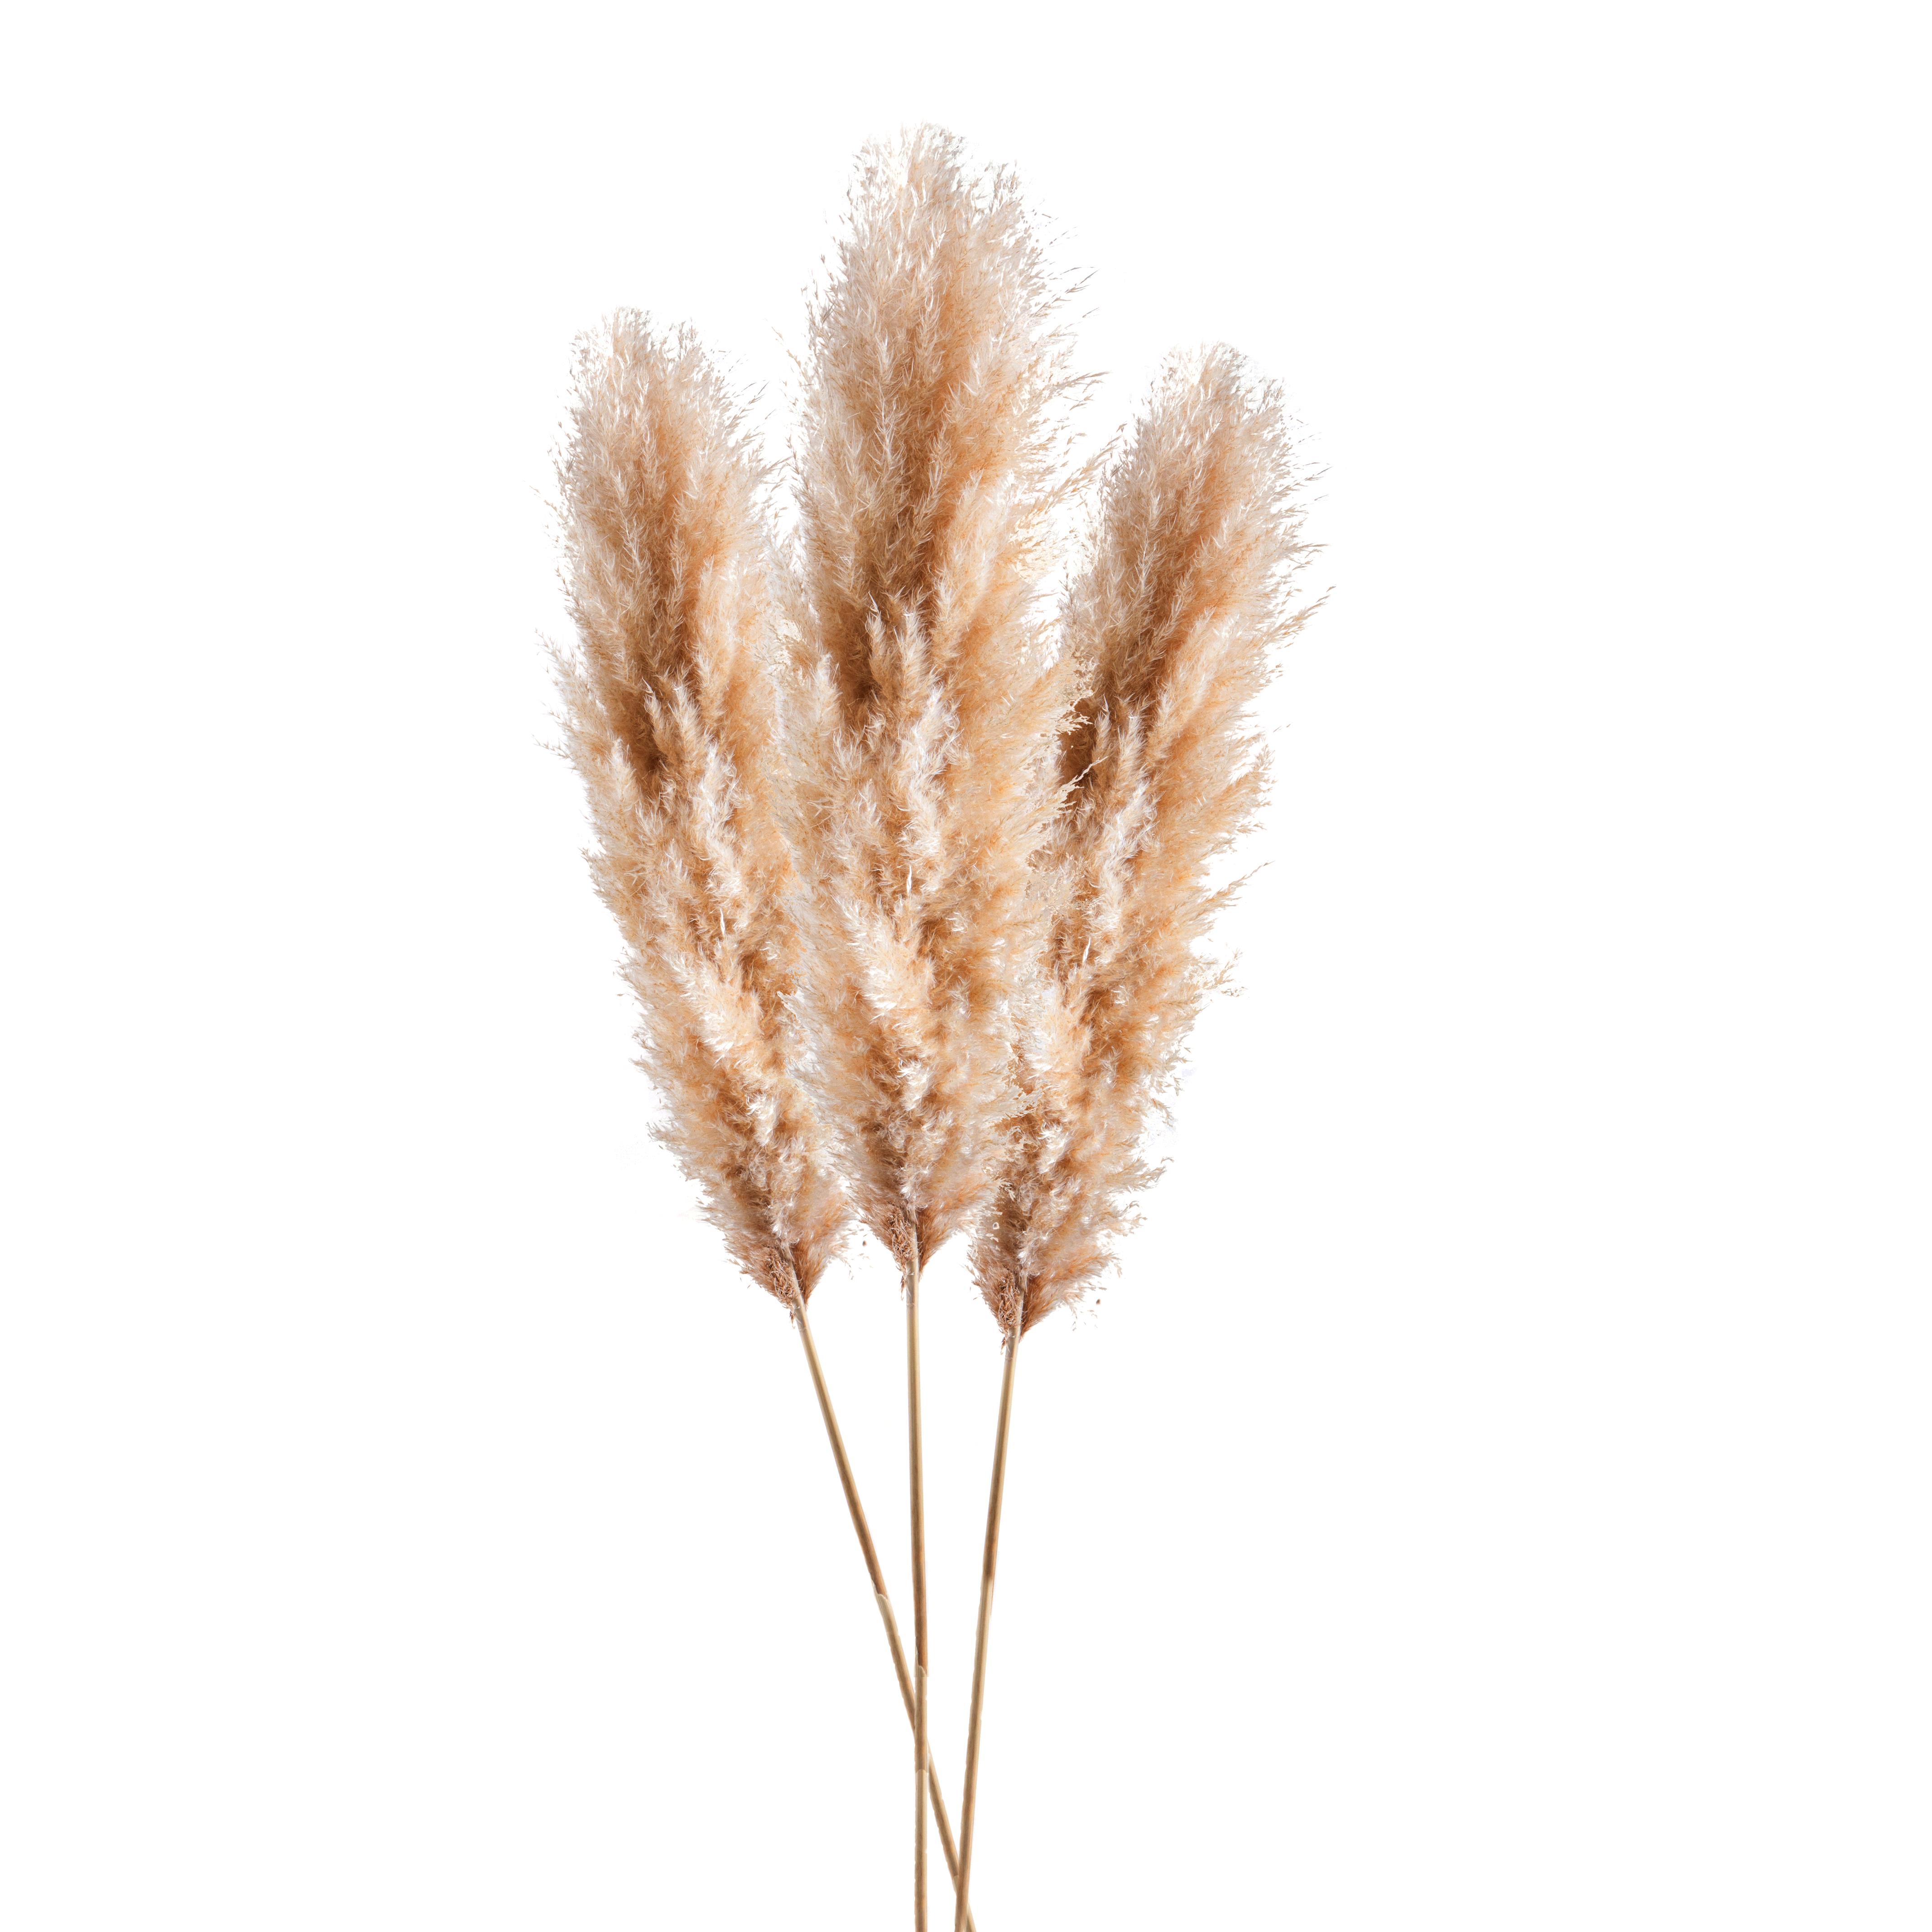 NATURAL PRODUCTS DRIED FLOWERS AND ERBS, FLOWERS, FRUITS AND NATURAL PROTEES, PAMPAS NATURALE 1 PZ 150/180 CM NO SACC